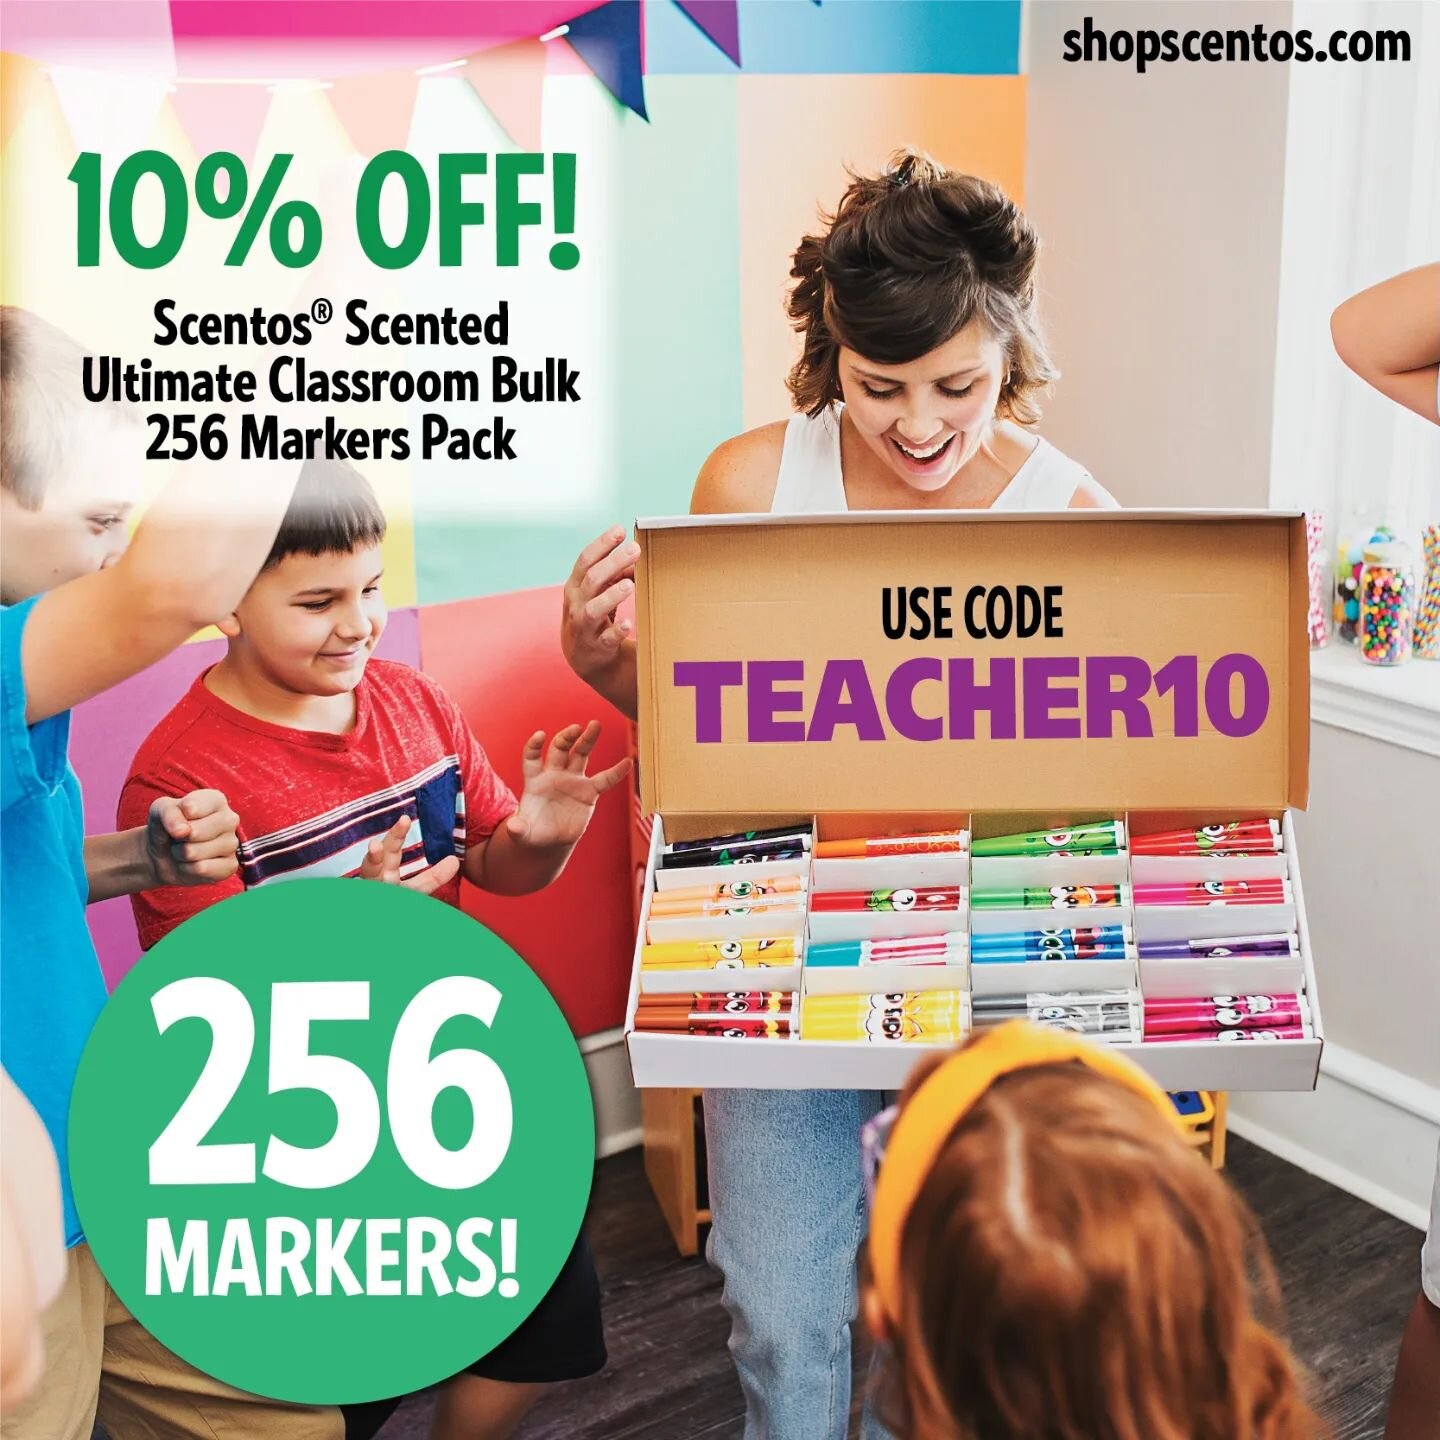 📣 Calling all teachers!!! 📣 Boy oh boy, do we have a sale for you! 🤩 

Our classic Scentos ultimate classroom box is on SALE! With code Teacher10, you'd be able to get an entire classroom full of markers for only 31&cent; per marker. (!!! CENTS! ?